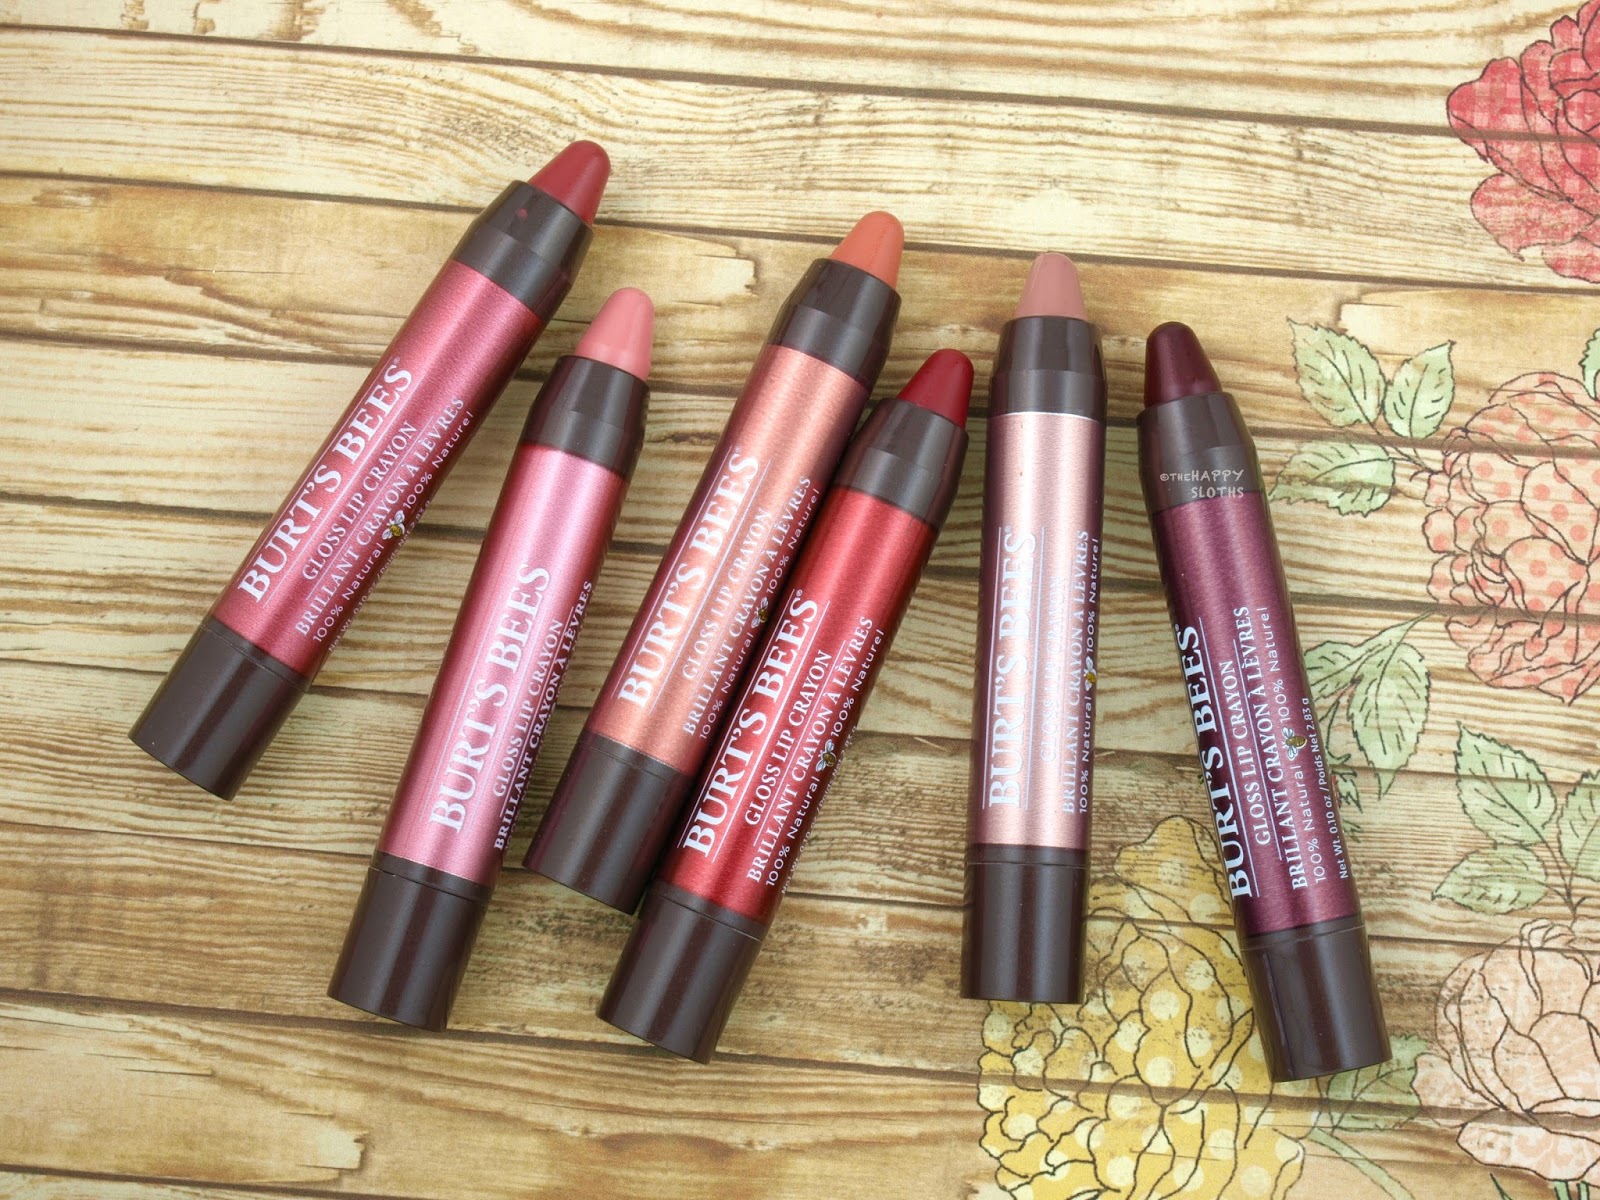 Burt's Bees Gloss Lip Crayon: Review and Swatches